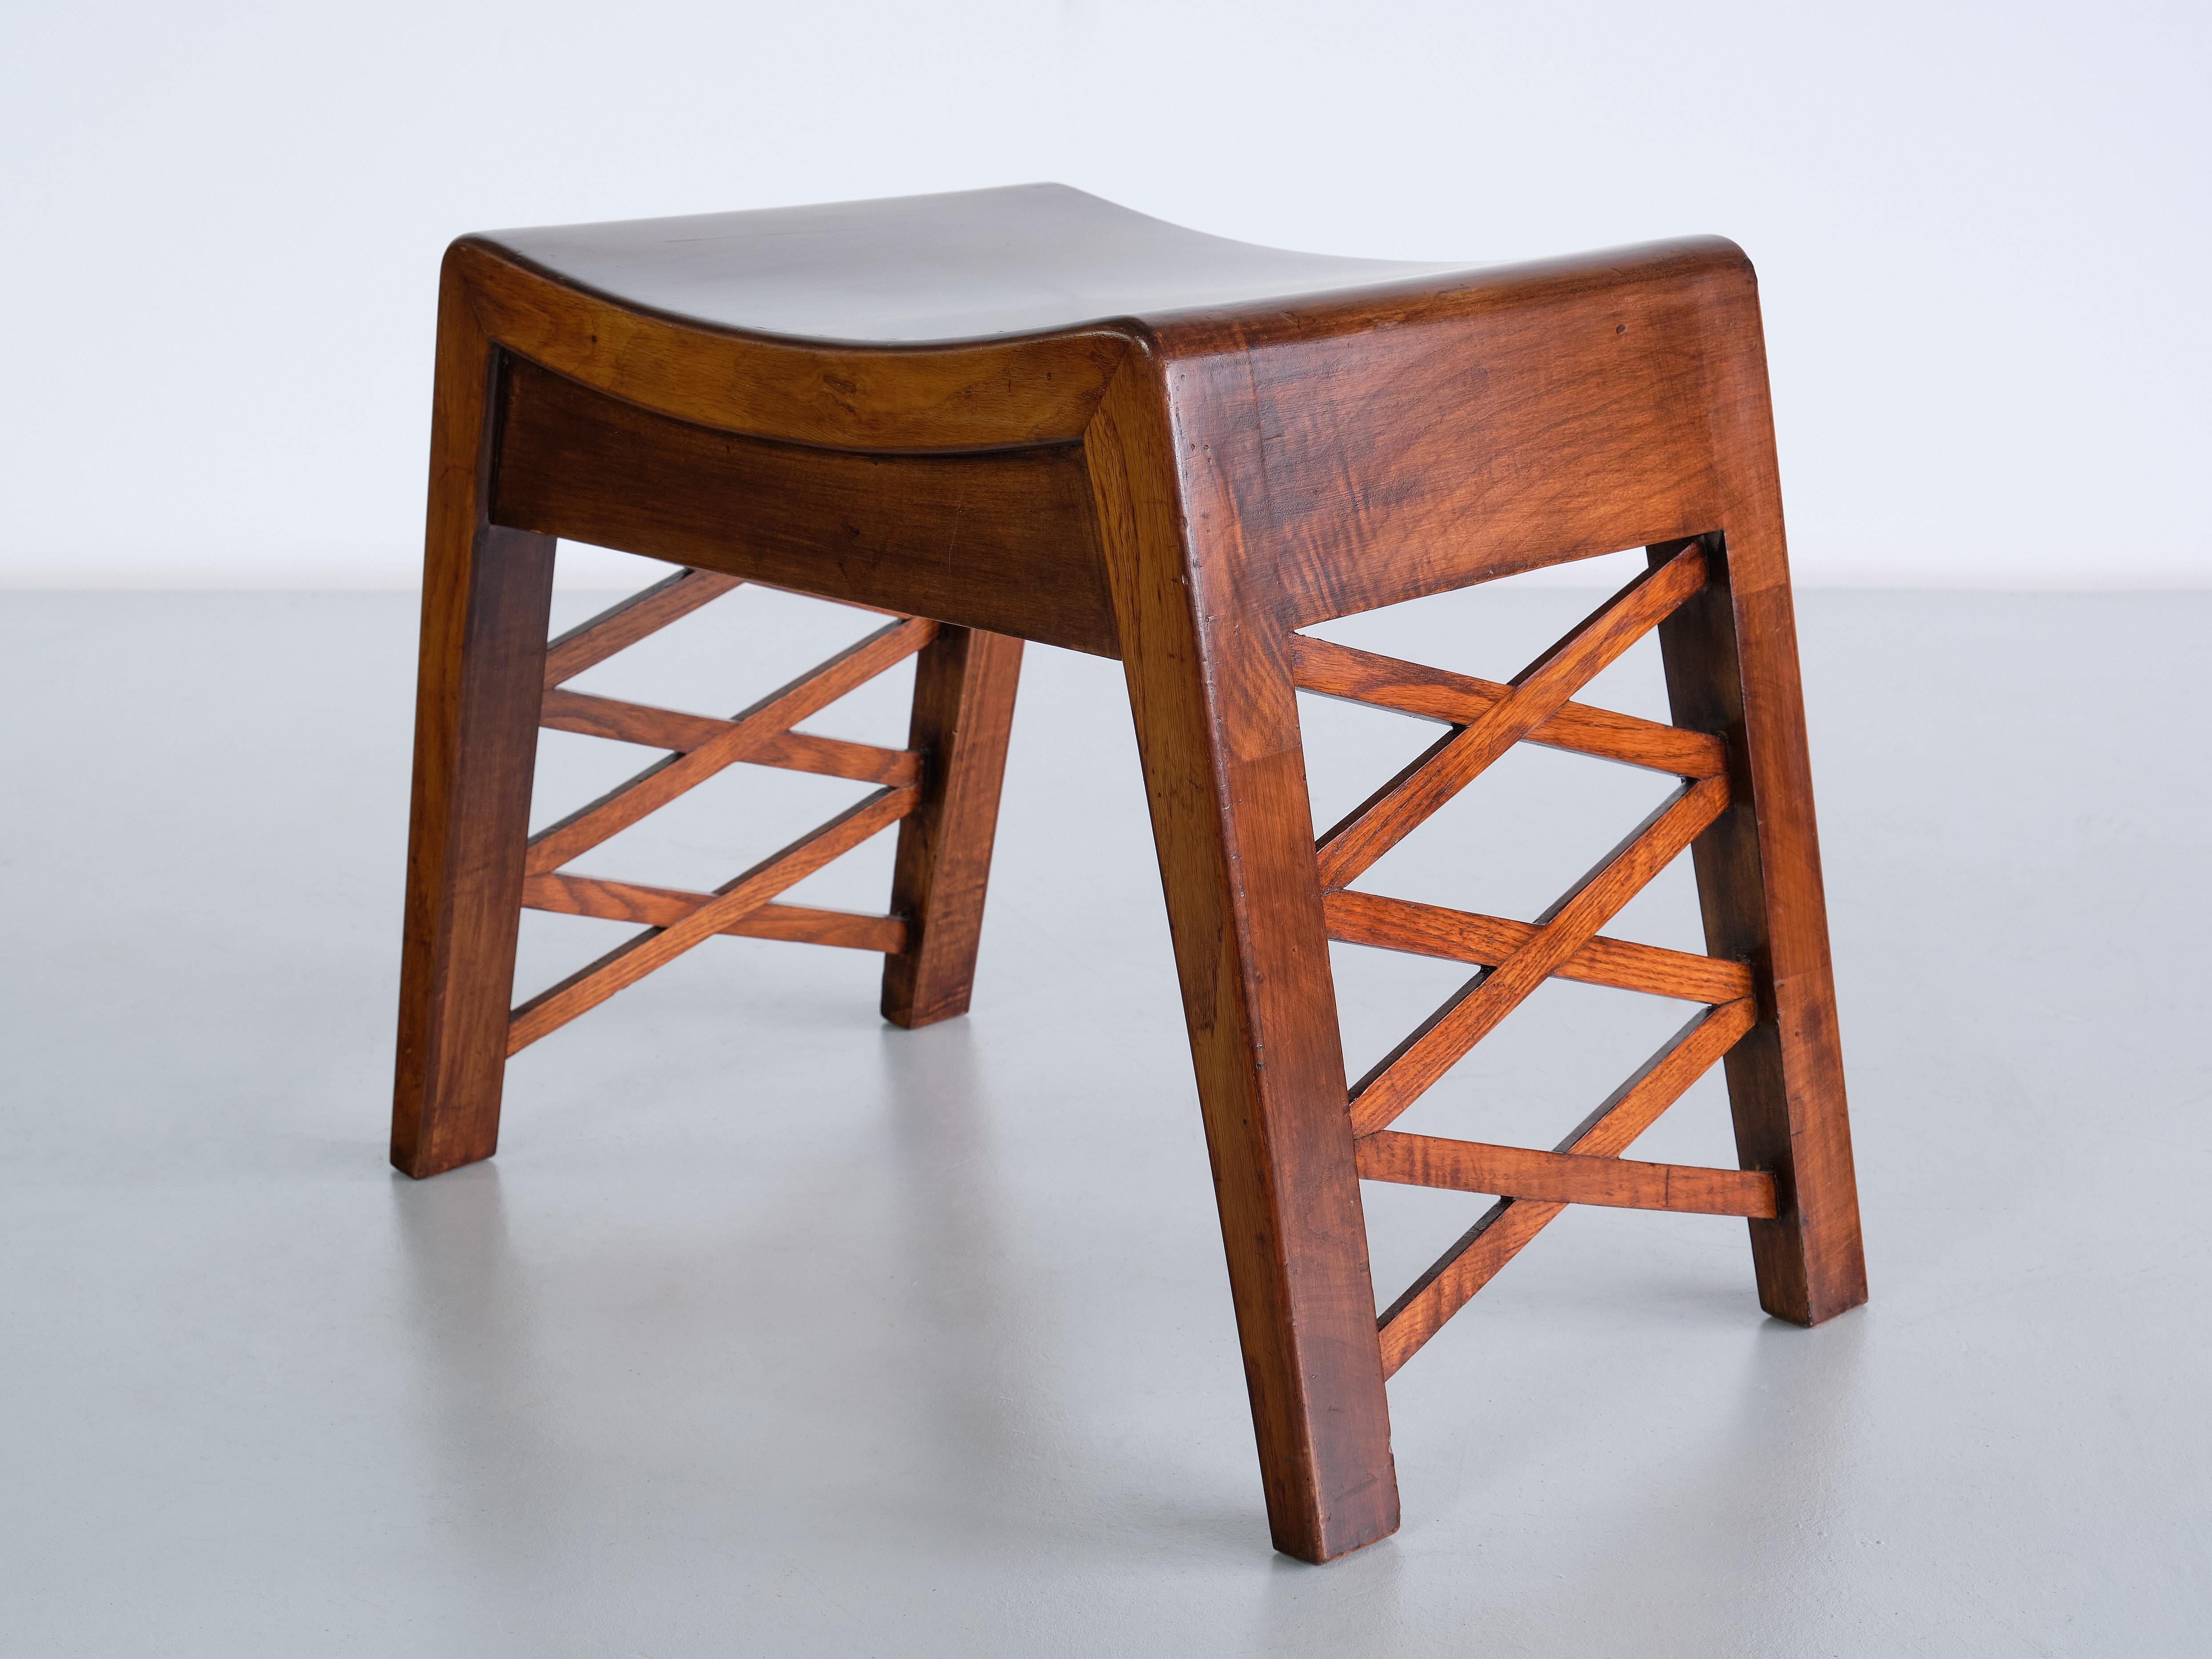 Piero Portaluppi Attributed Pair of Stools in Chestnut Wood, Italy, Late 1930s For Sale 2